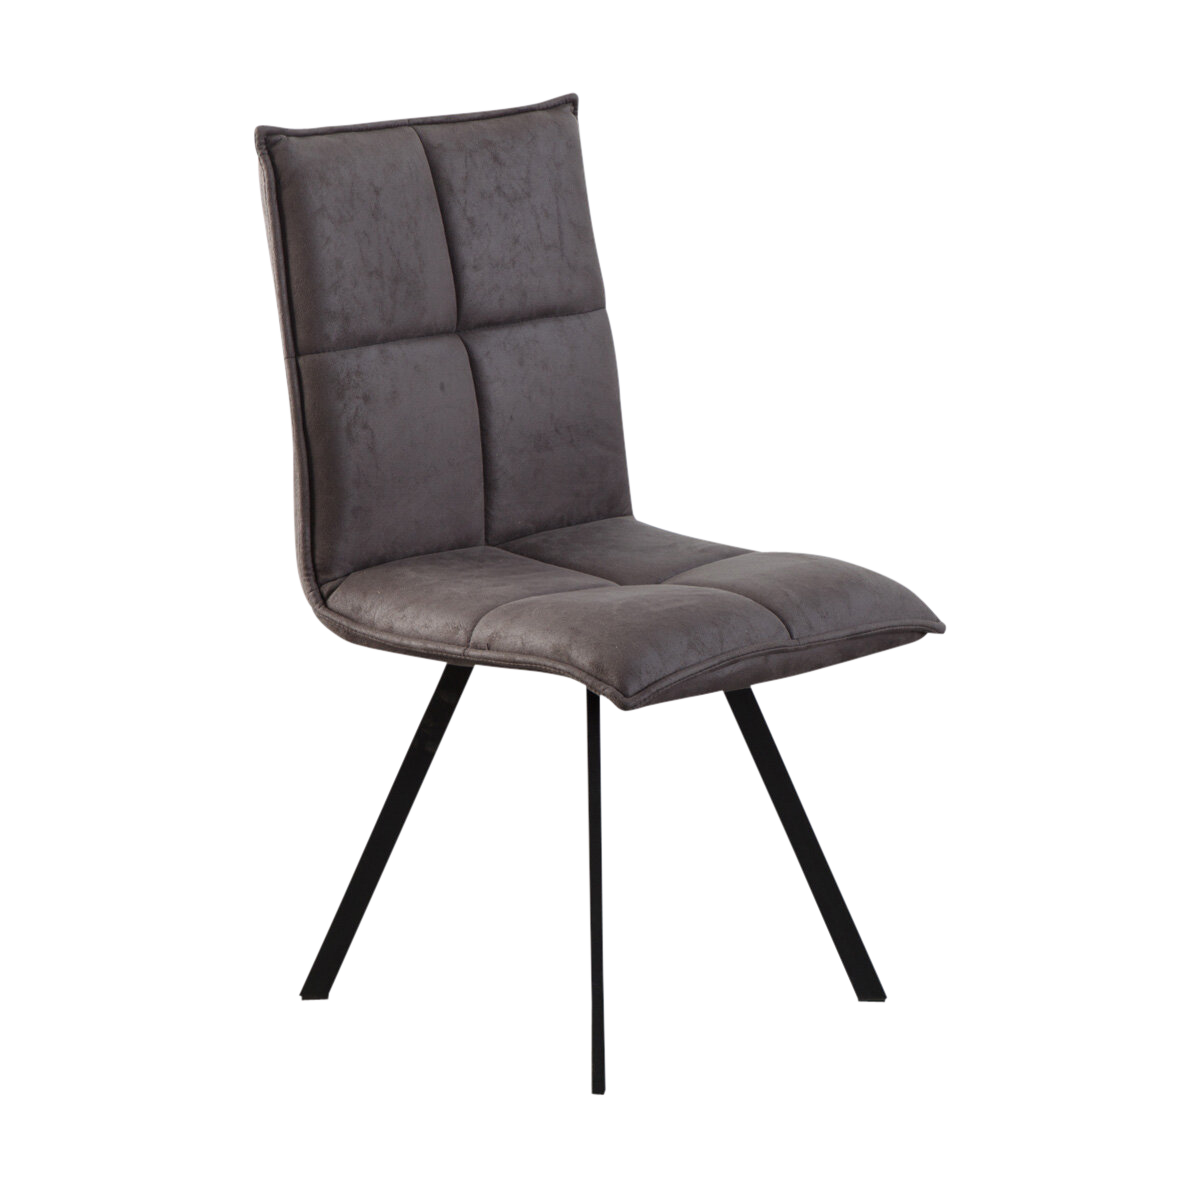 https://assets.made-in-meubles.com/media/catalog/product/p/r/product_s_t_str78-chaise-biais.png